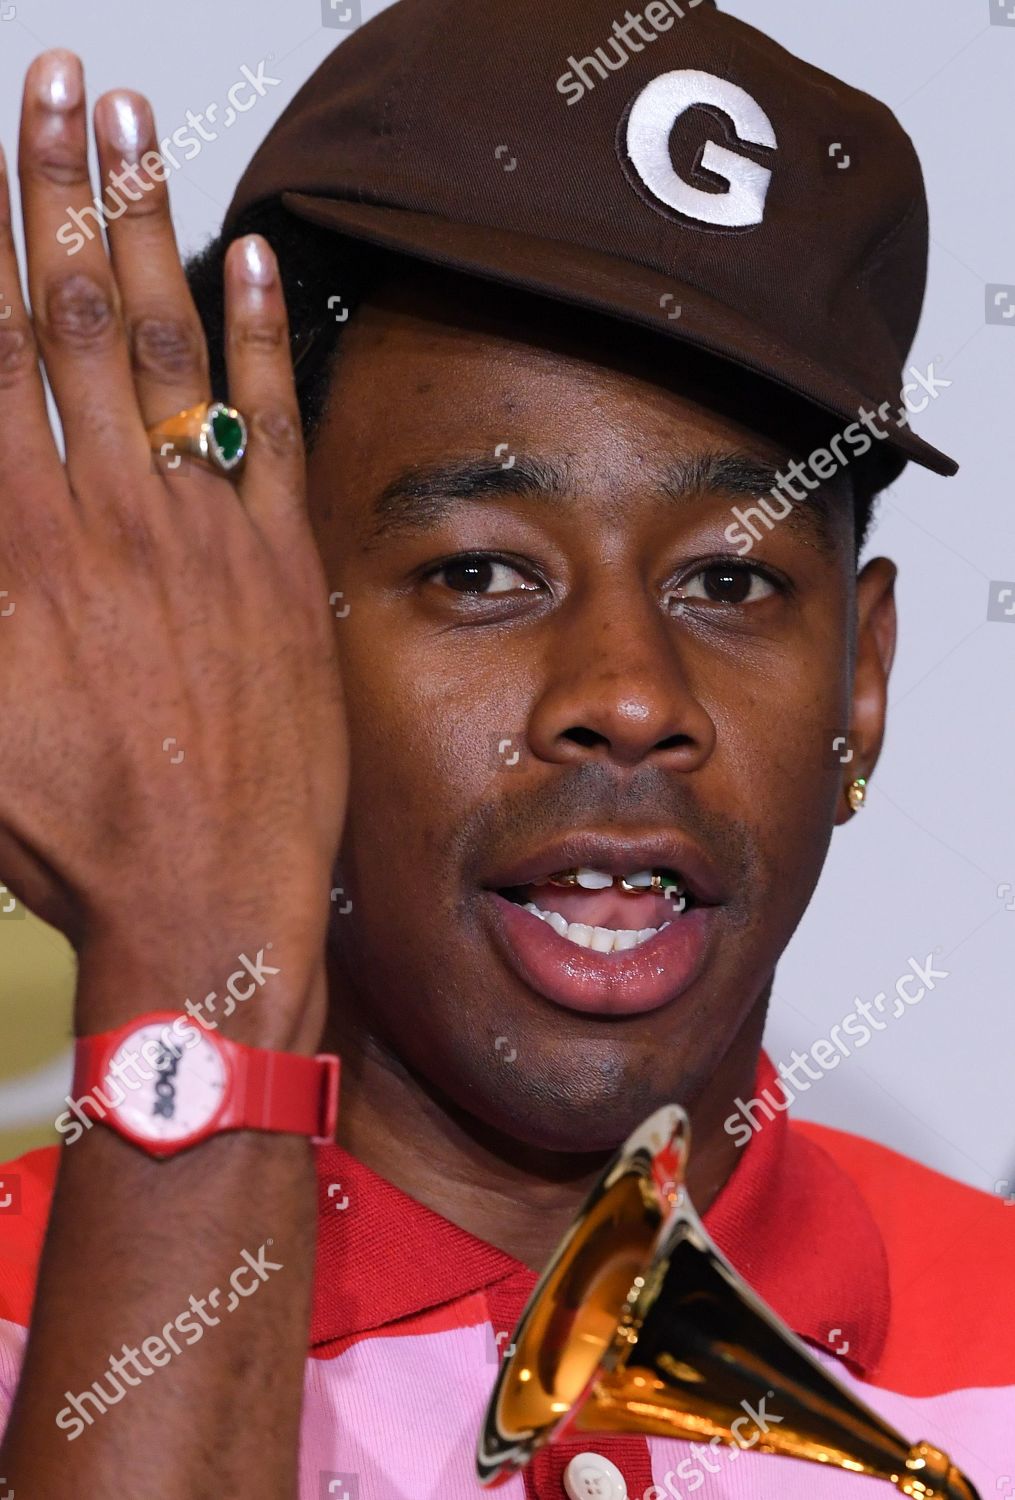 Tyler the Creator - USA - 62nd Grammy Awards - Los Angeles